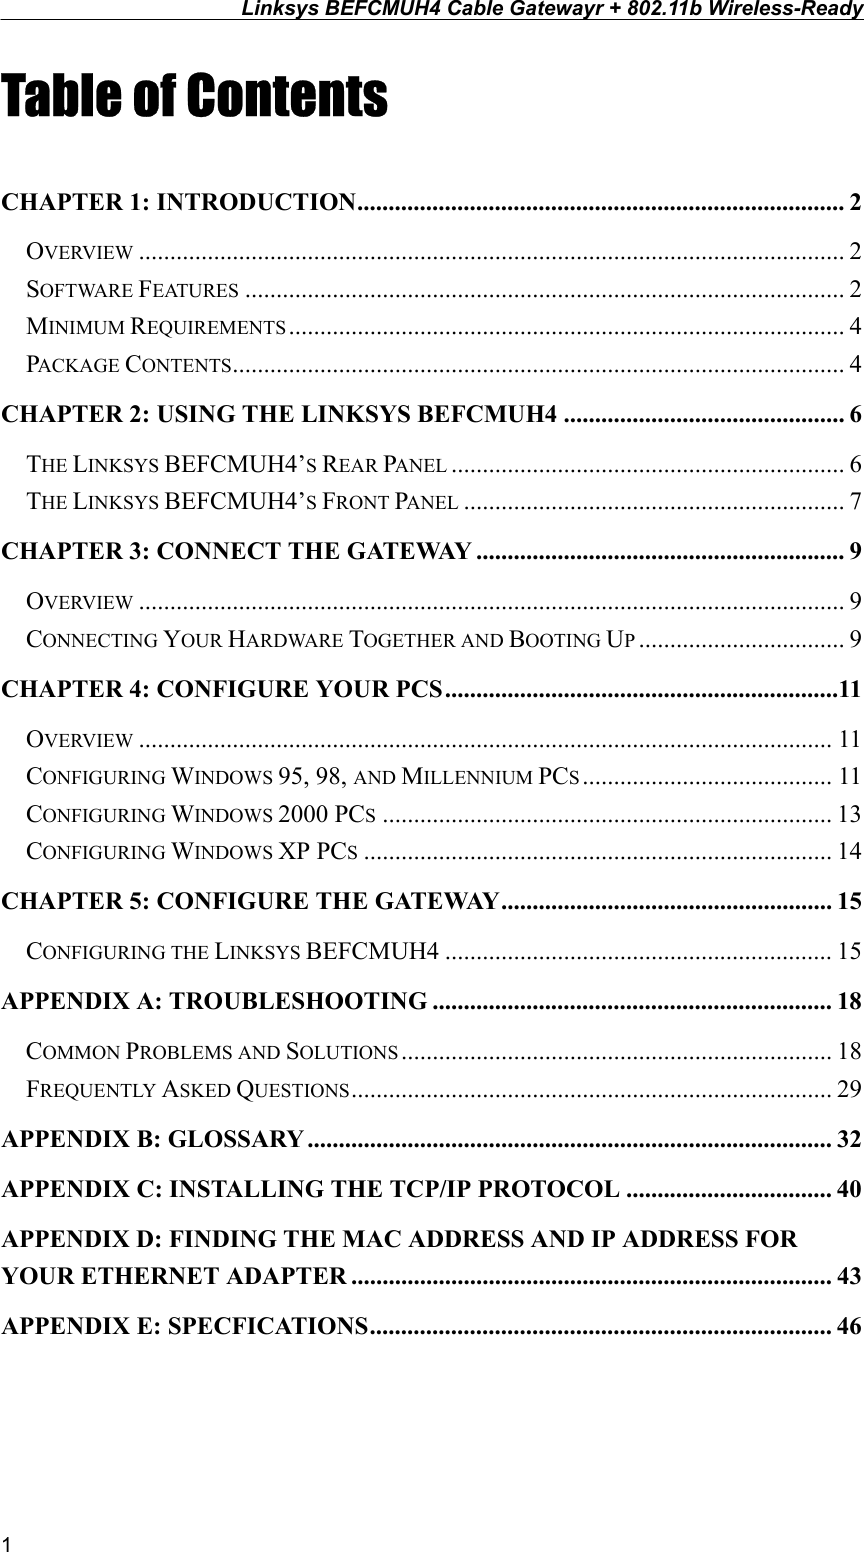 Linksys BEFCMUH4 Cable Gatewayr + 802.11b Wireless-Ready  Table of Contents  CHAPTER 1: INTRODUCTION.............................................................................. 2 OVERVIEW ................................................................................................................. 2 SOFTWARE FEATURES ................................................................................................ 2 MINIMUM REQUIREMENTS......................................................................................... 4 PACKAGE CONTENTS.................................................................................................. 4 CHAPTER 2: USING THE LINKSYS BEFCMUH4 ............................................. 6 THE LINKSYS BEFCMUH4’S REAR PANEL ............................................................... 6 THE LINKSYS BEFCMUH4’S FRONT PANEL ............................................................. 7 CHAPTER 3: CONNECT THE GATEWAY ........................................................... 9 OVERVIEW ................................................................................................................. 9 CONNECTING YOUR HARDWARE TOGETHER AND BOOTING UP................................. 9 CHAPTER 4: CONFIGURE YOUR PCS ...............................................................11 OVERVIEW ............................................................................................................... 11 CONFIGURING WINDOWS 95, 98, AND MILLENNIUM PCS........................................ 11 CONFIGURING WINDOWS 2000 PCS........................................................................ 13 CONFIGURING WINDOWS XP PCS........................................................................... 14 CHAPTER 5: CONFIGURE THE GATEWAY..................................................... 15 CONFIGURING THE LINKSYS BEFCMUH4 .............................................................. 15 APPENDIX A: TROUBLESHOOTING ................................................................ 18 COMMON PROBLEMS AND SOLUTIONS ..................................................................... 18 FREQUENTLY ASKED QUESTIONS............................................................................. 29 APPENDIX B: GLOSSARY .................................................................................... 32 APPENDIX C: INSTALLING THE TCP/IP PROTOCOL ................................. 40 APPENDIX D: FINDING THE MAC ADDRESS AND IP ADDRESS FOR YOUR ETHERNET ADAPTER ............................................................................. 43 APPENDIX E: SPECFICATIONS.......................................................................... 46  1 